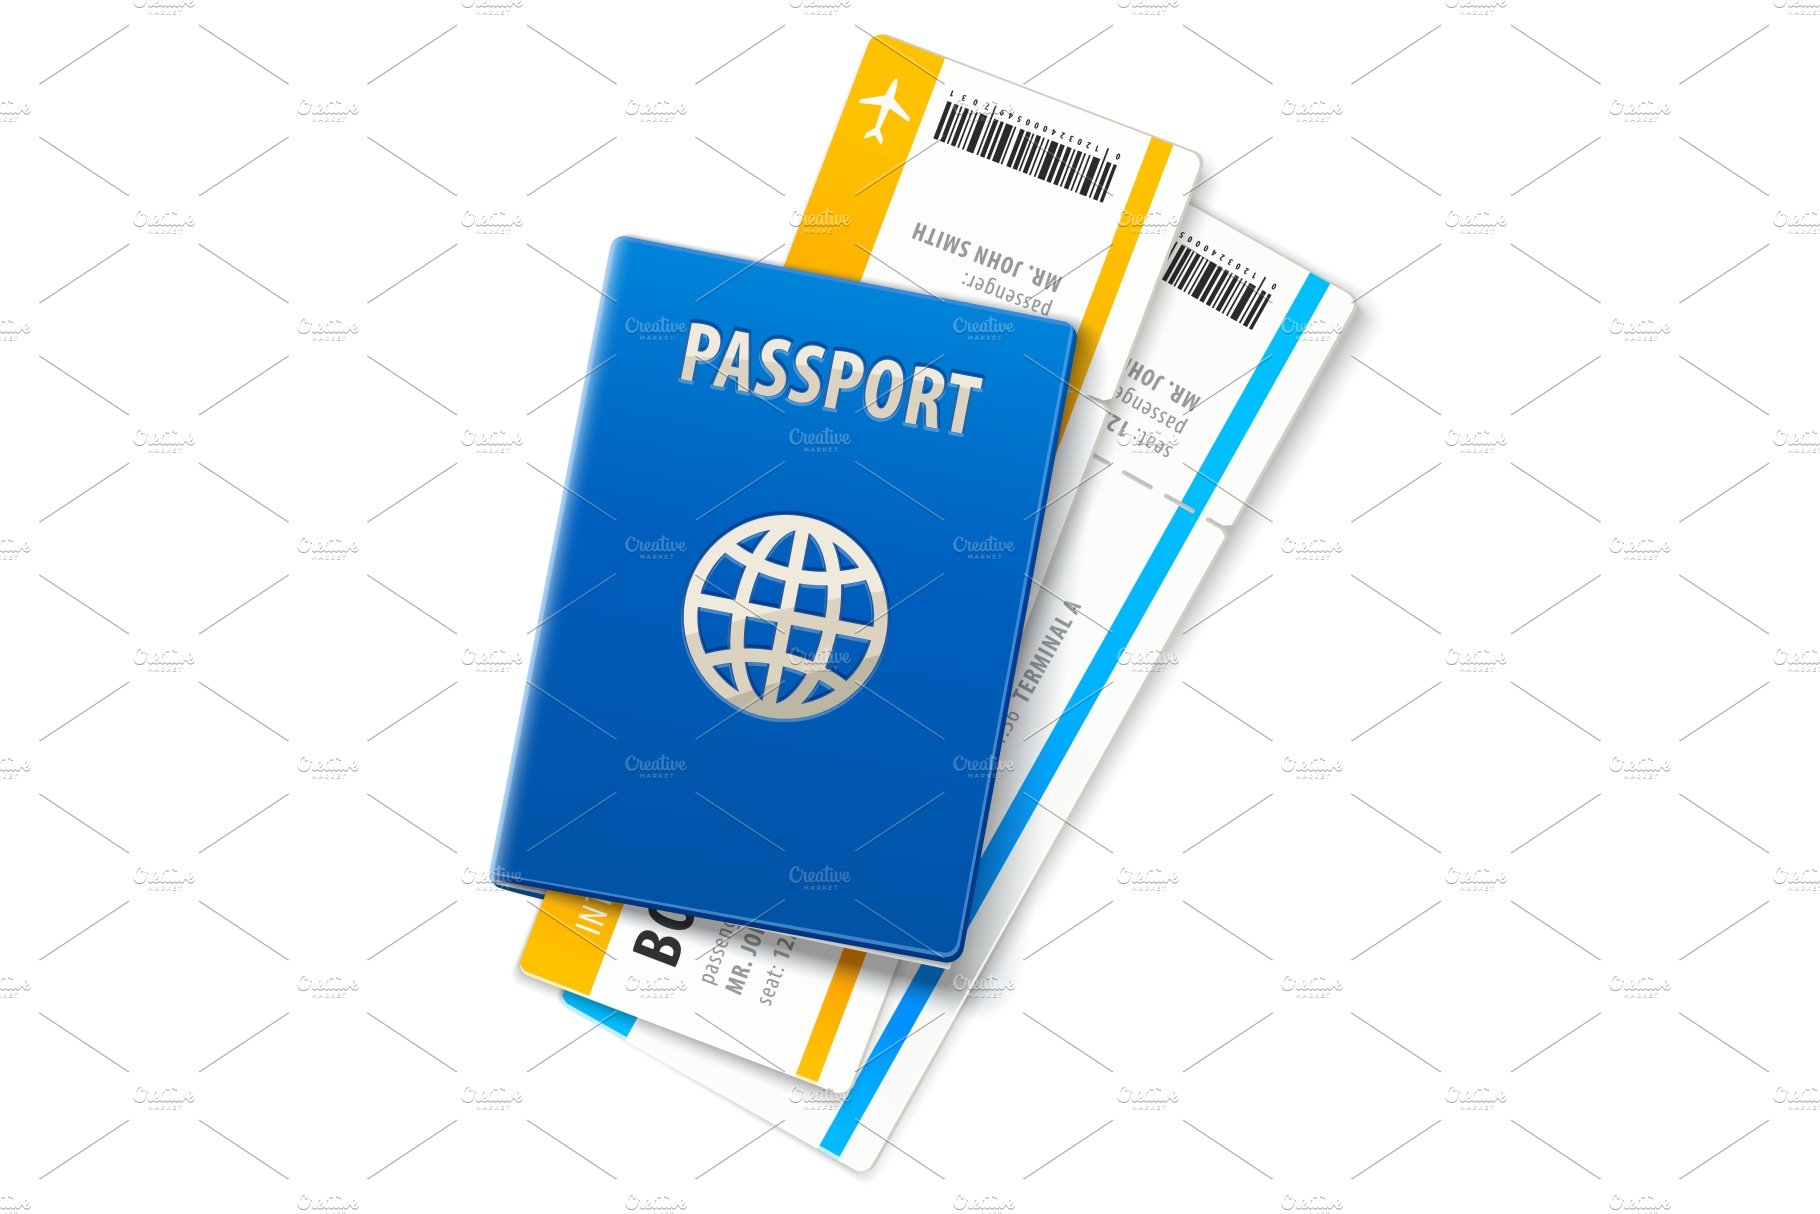 Travel documents passport and ticket cover image.